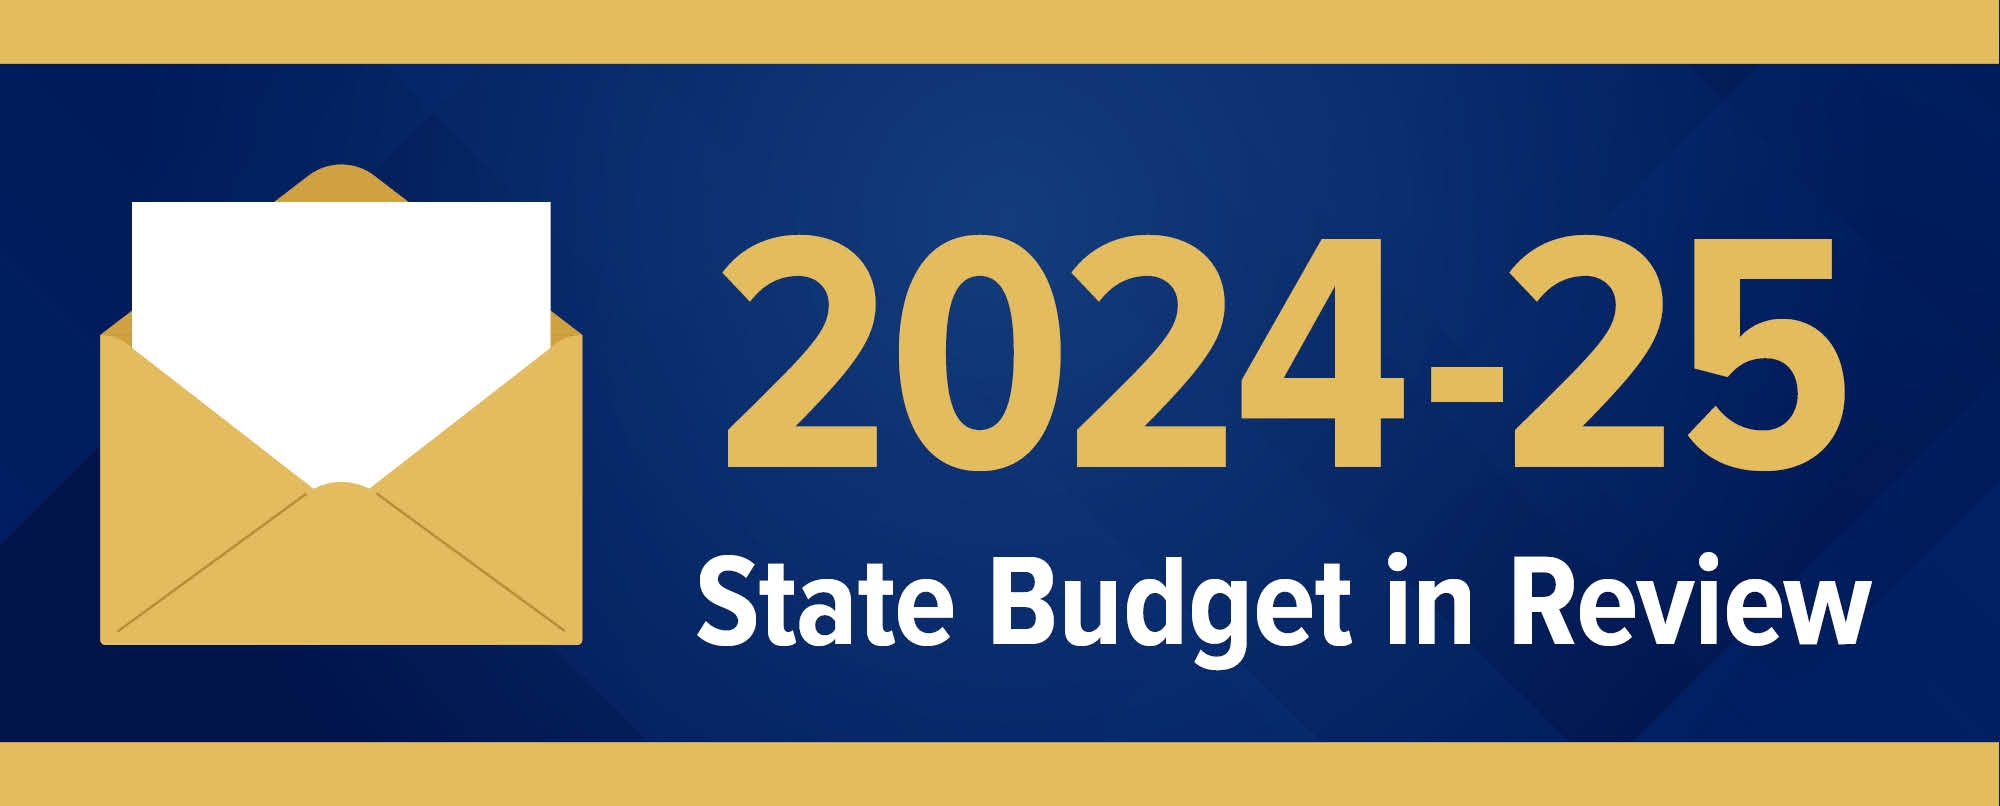 2024-25 State Budget in Review